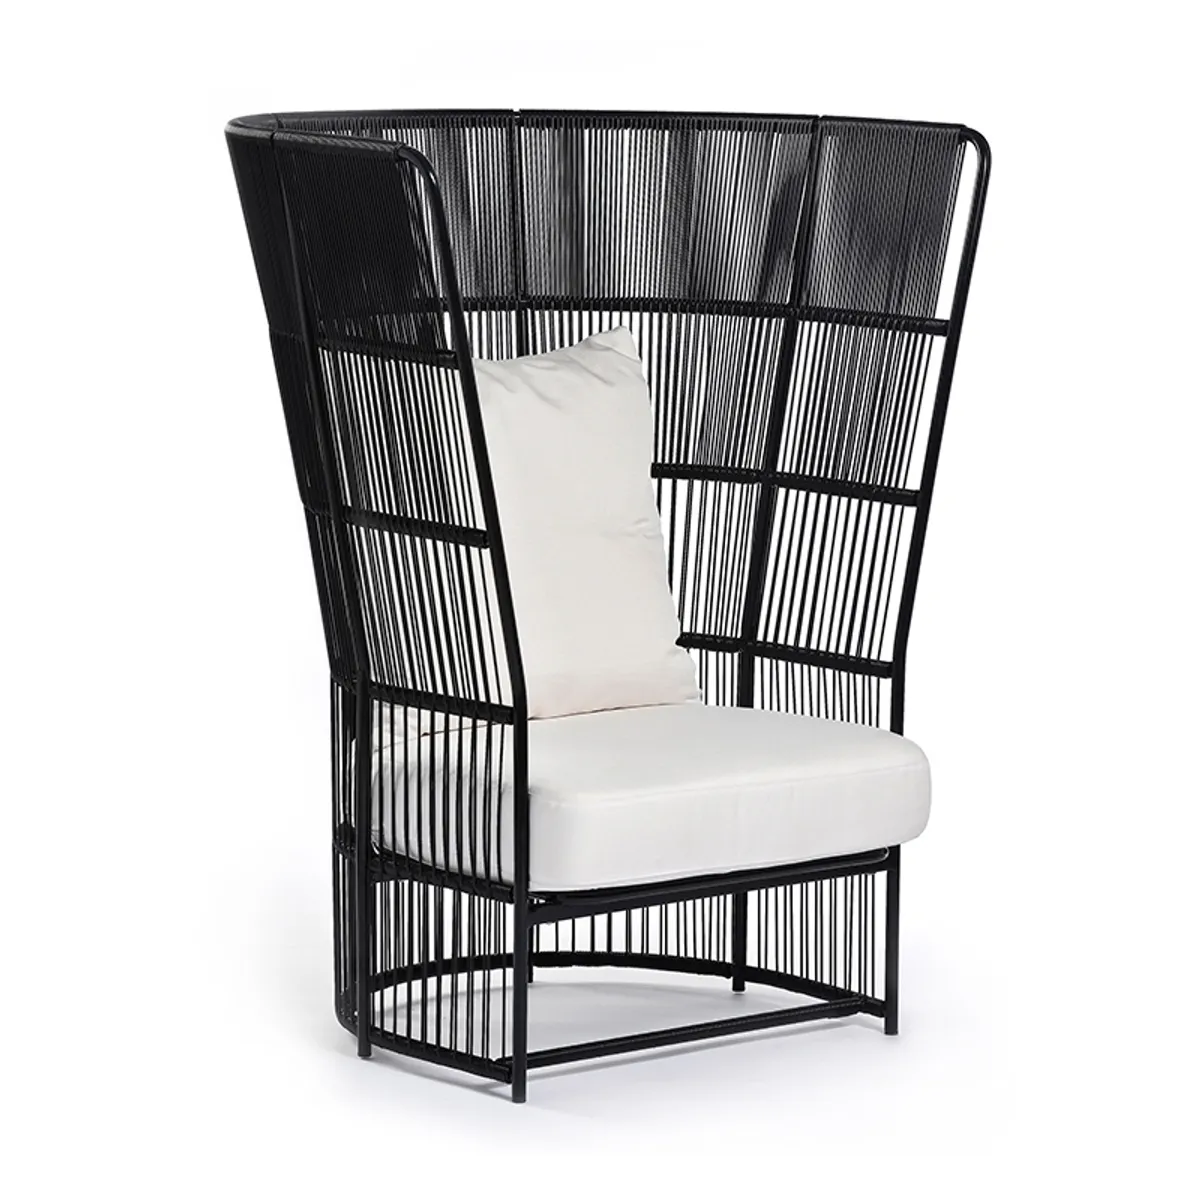 TIBIDABO-High-back-chair aluminium and woven rope outdoor furniture by insideoutcontracts